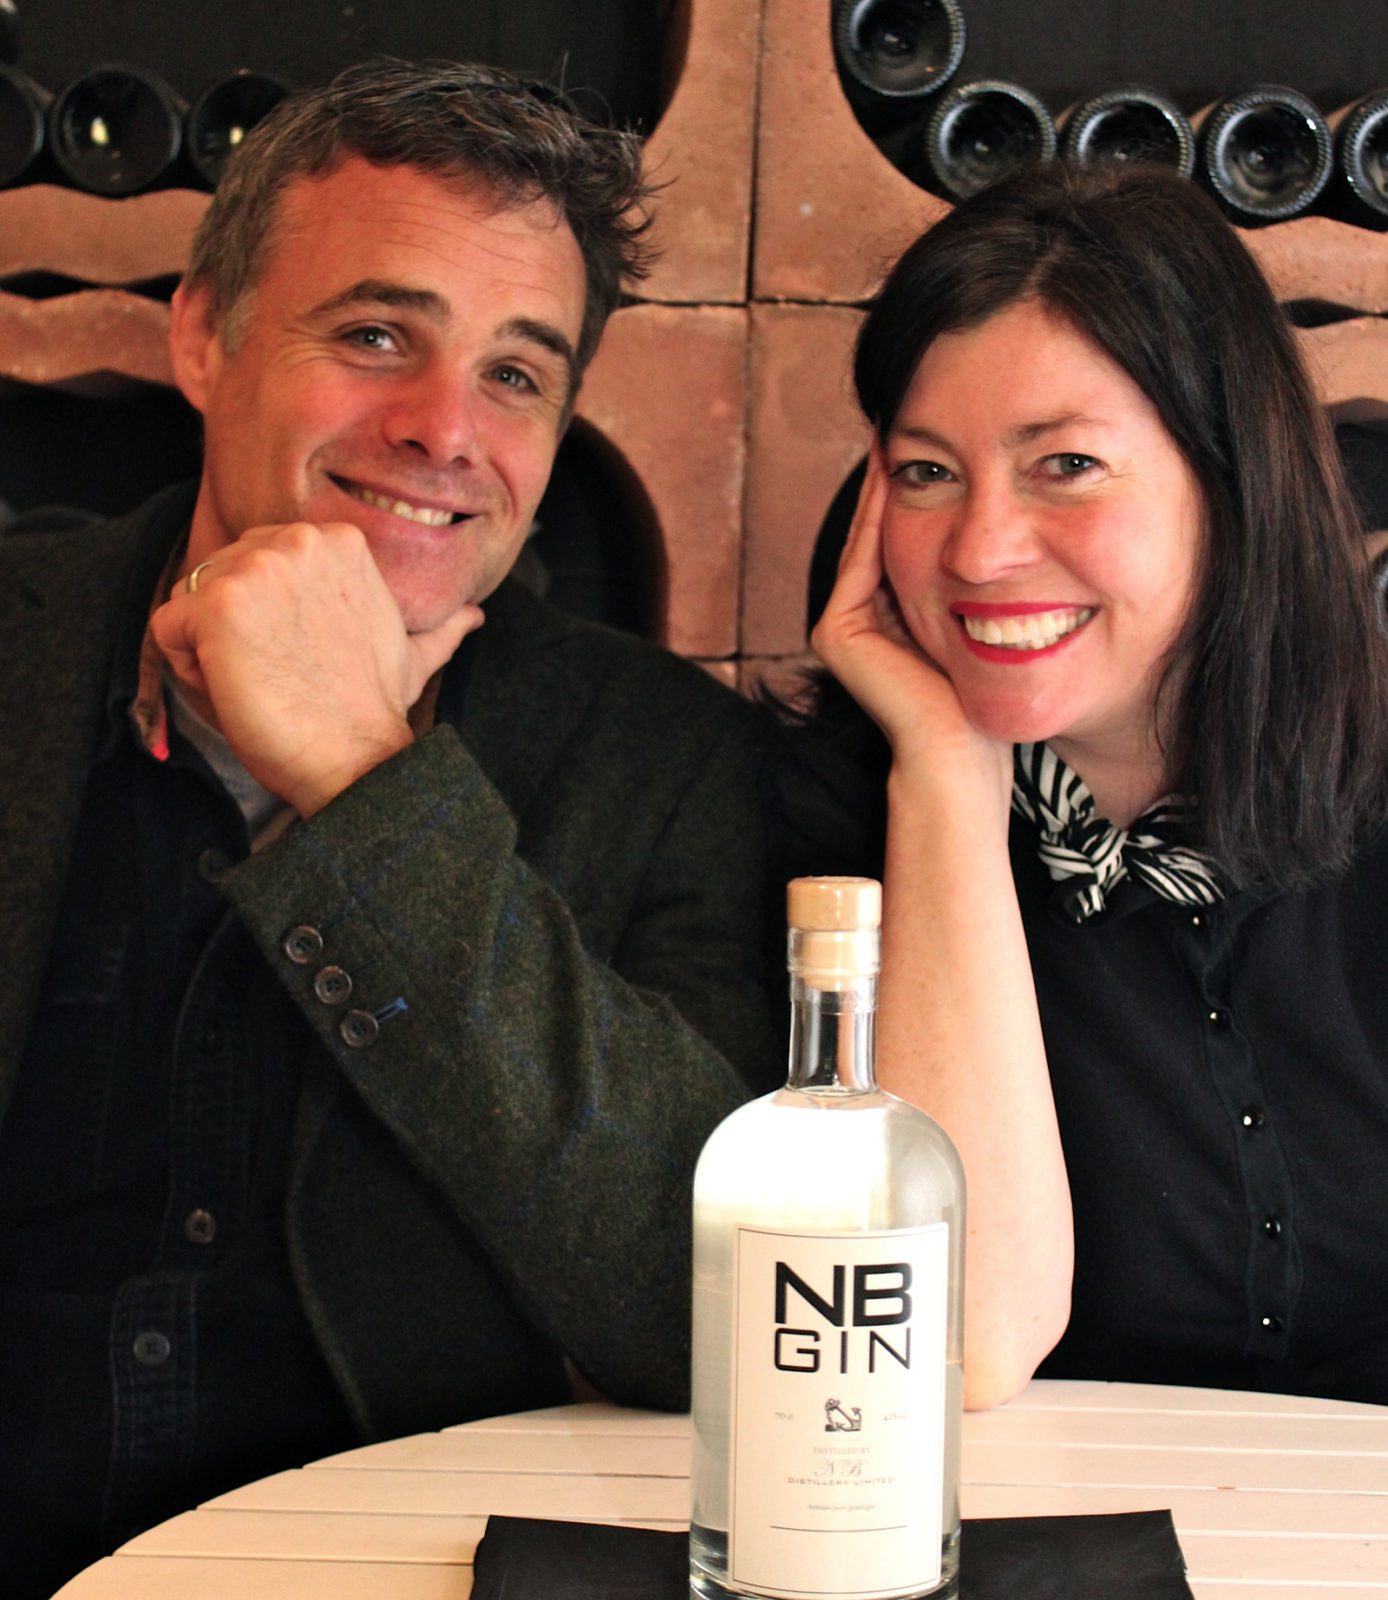 Steve and Vivienne Muir of NB Gin. Picture: NB gin